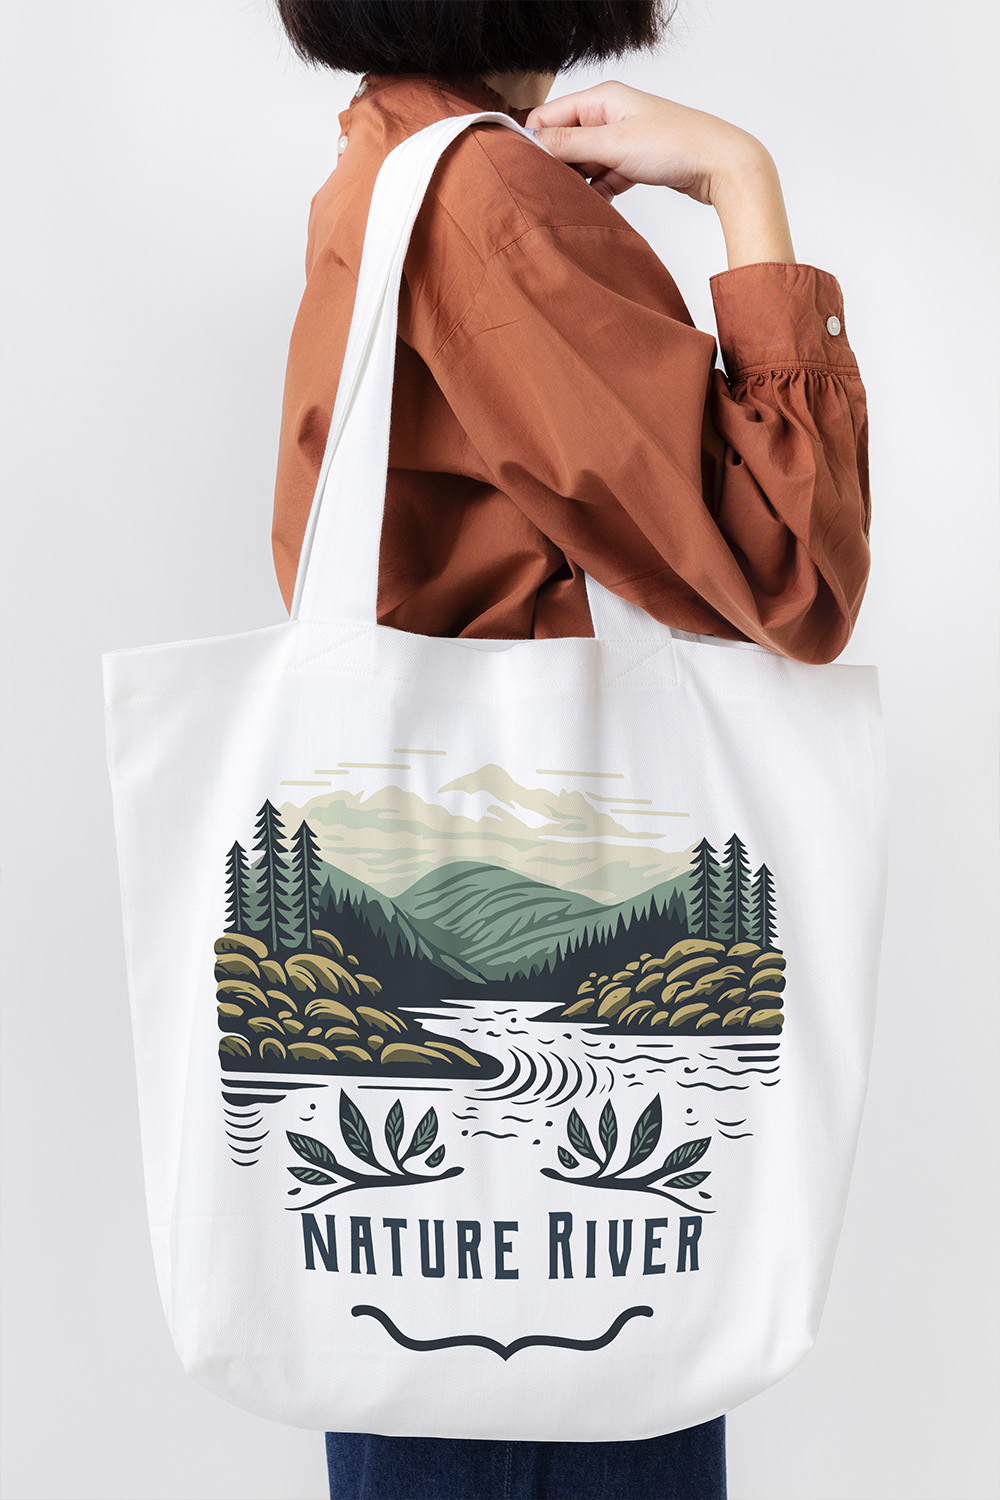 Nature River Mountain Logo Template pinterest preview image.